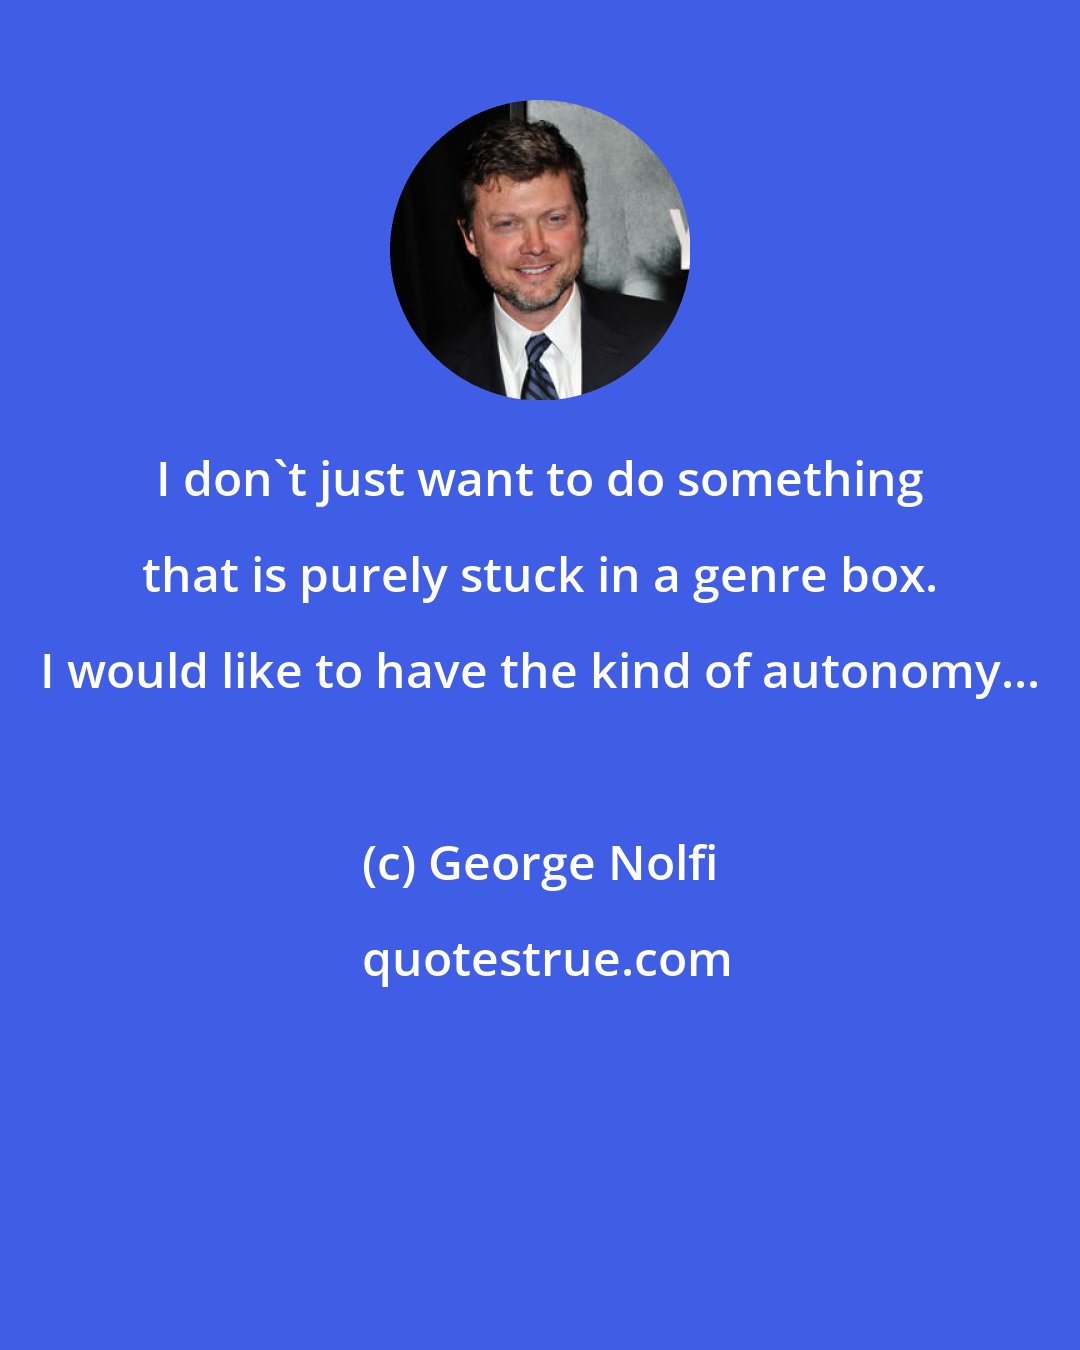 George Nolfi: I don't just want to do something that is purely stuck in a genre box. I would like to have the kind of autonomy...